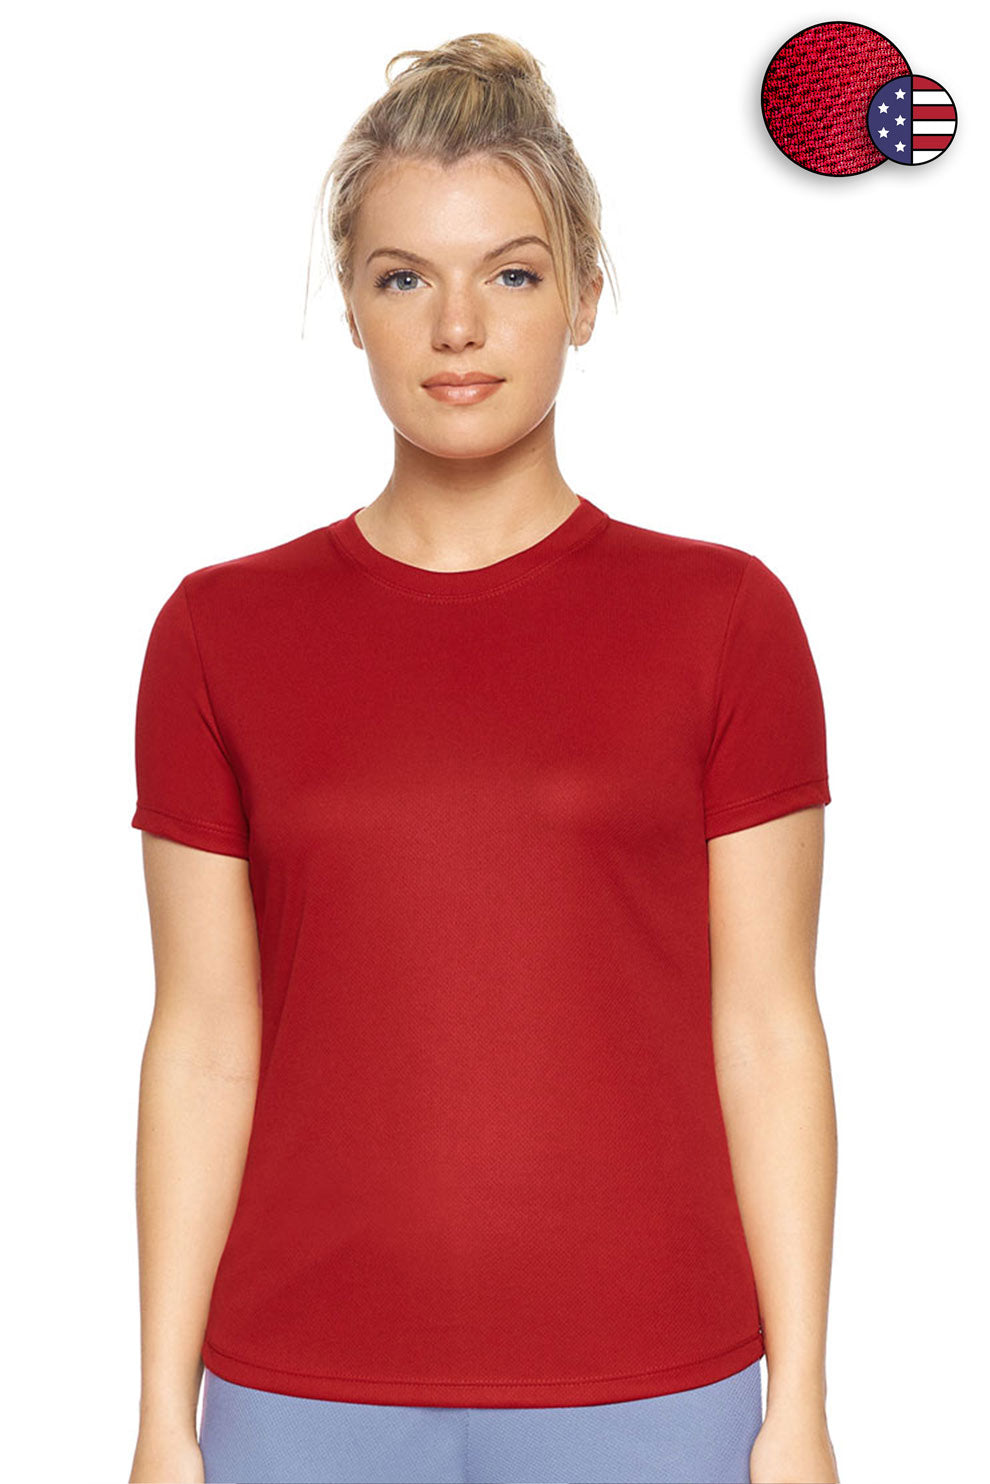 Expert Brand Wholesale Women's Oxymesh Crewneck Performance Tee Made in USA AJ201#true-red